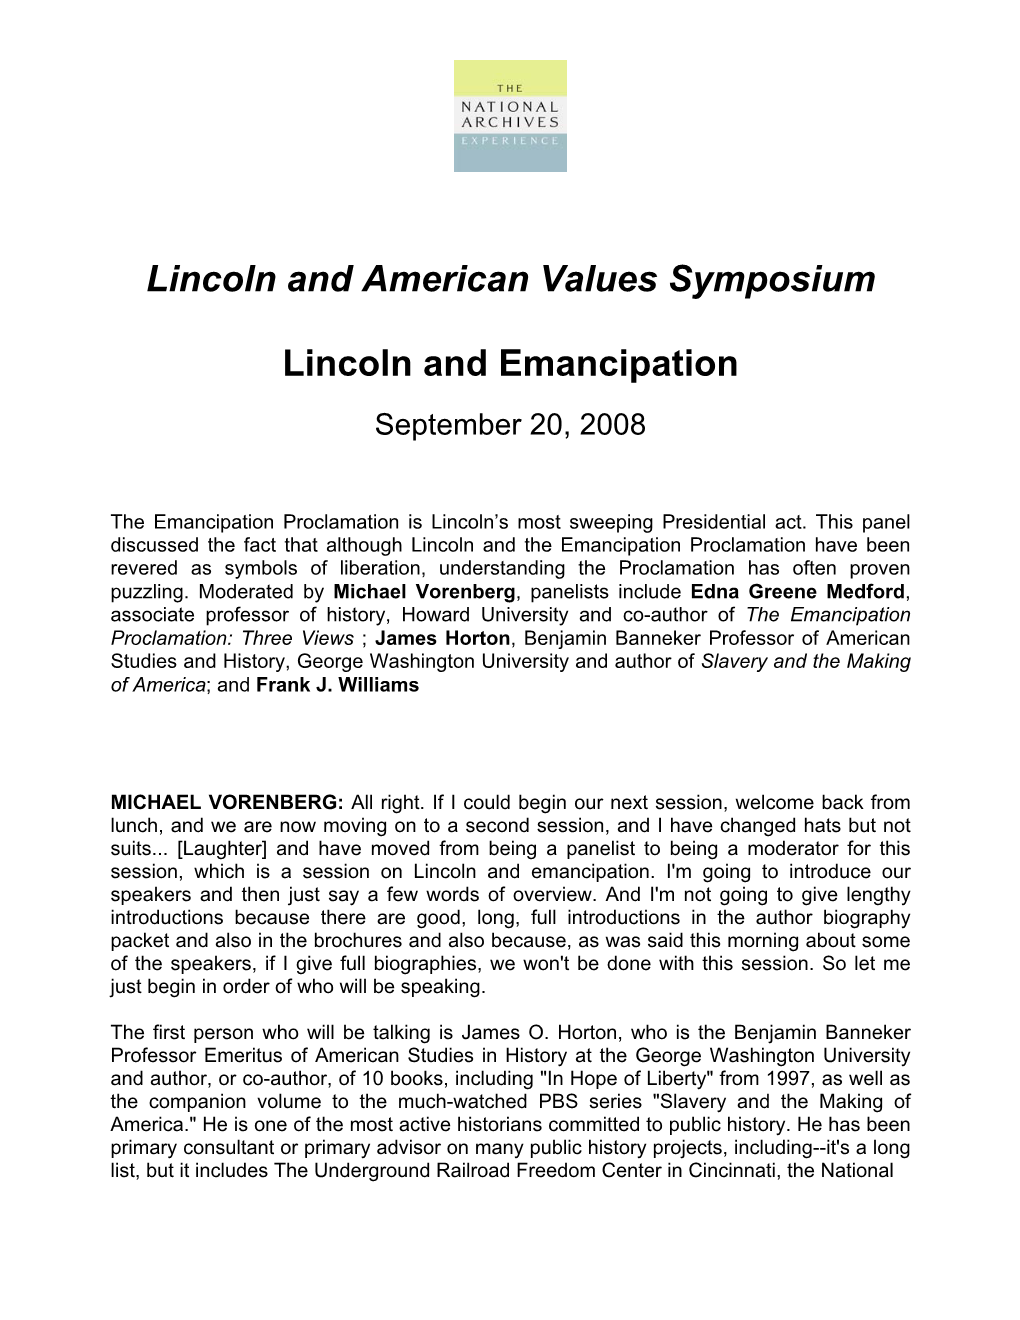 Lincoln and American Values Symposium Lincoln And